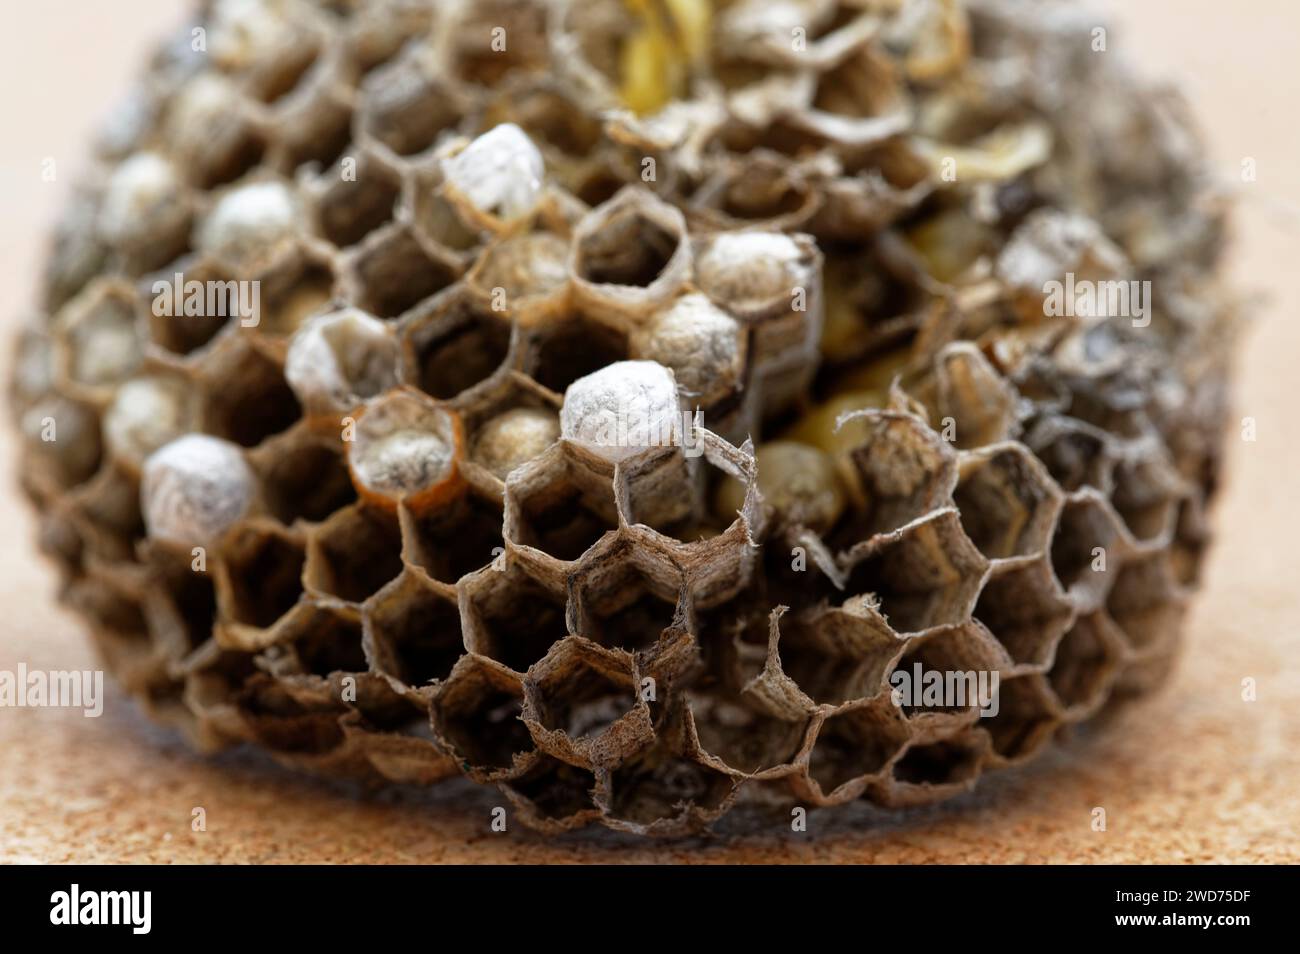 A paper wasp's nest that has been opened. It shows the cells and caps where eggs and larva are. Stock Photo